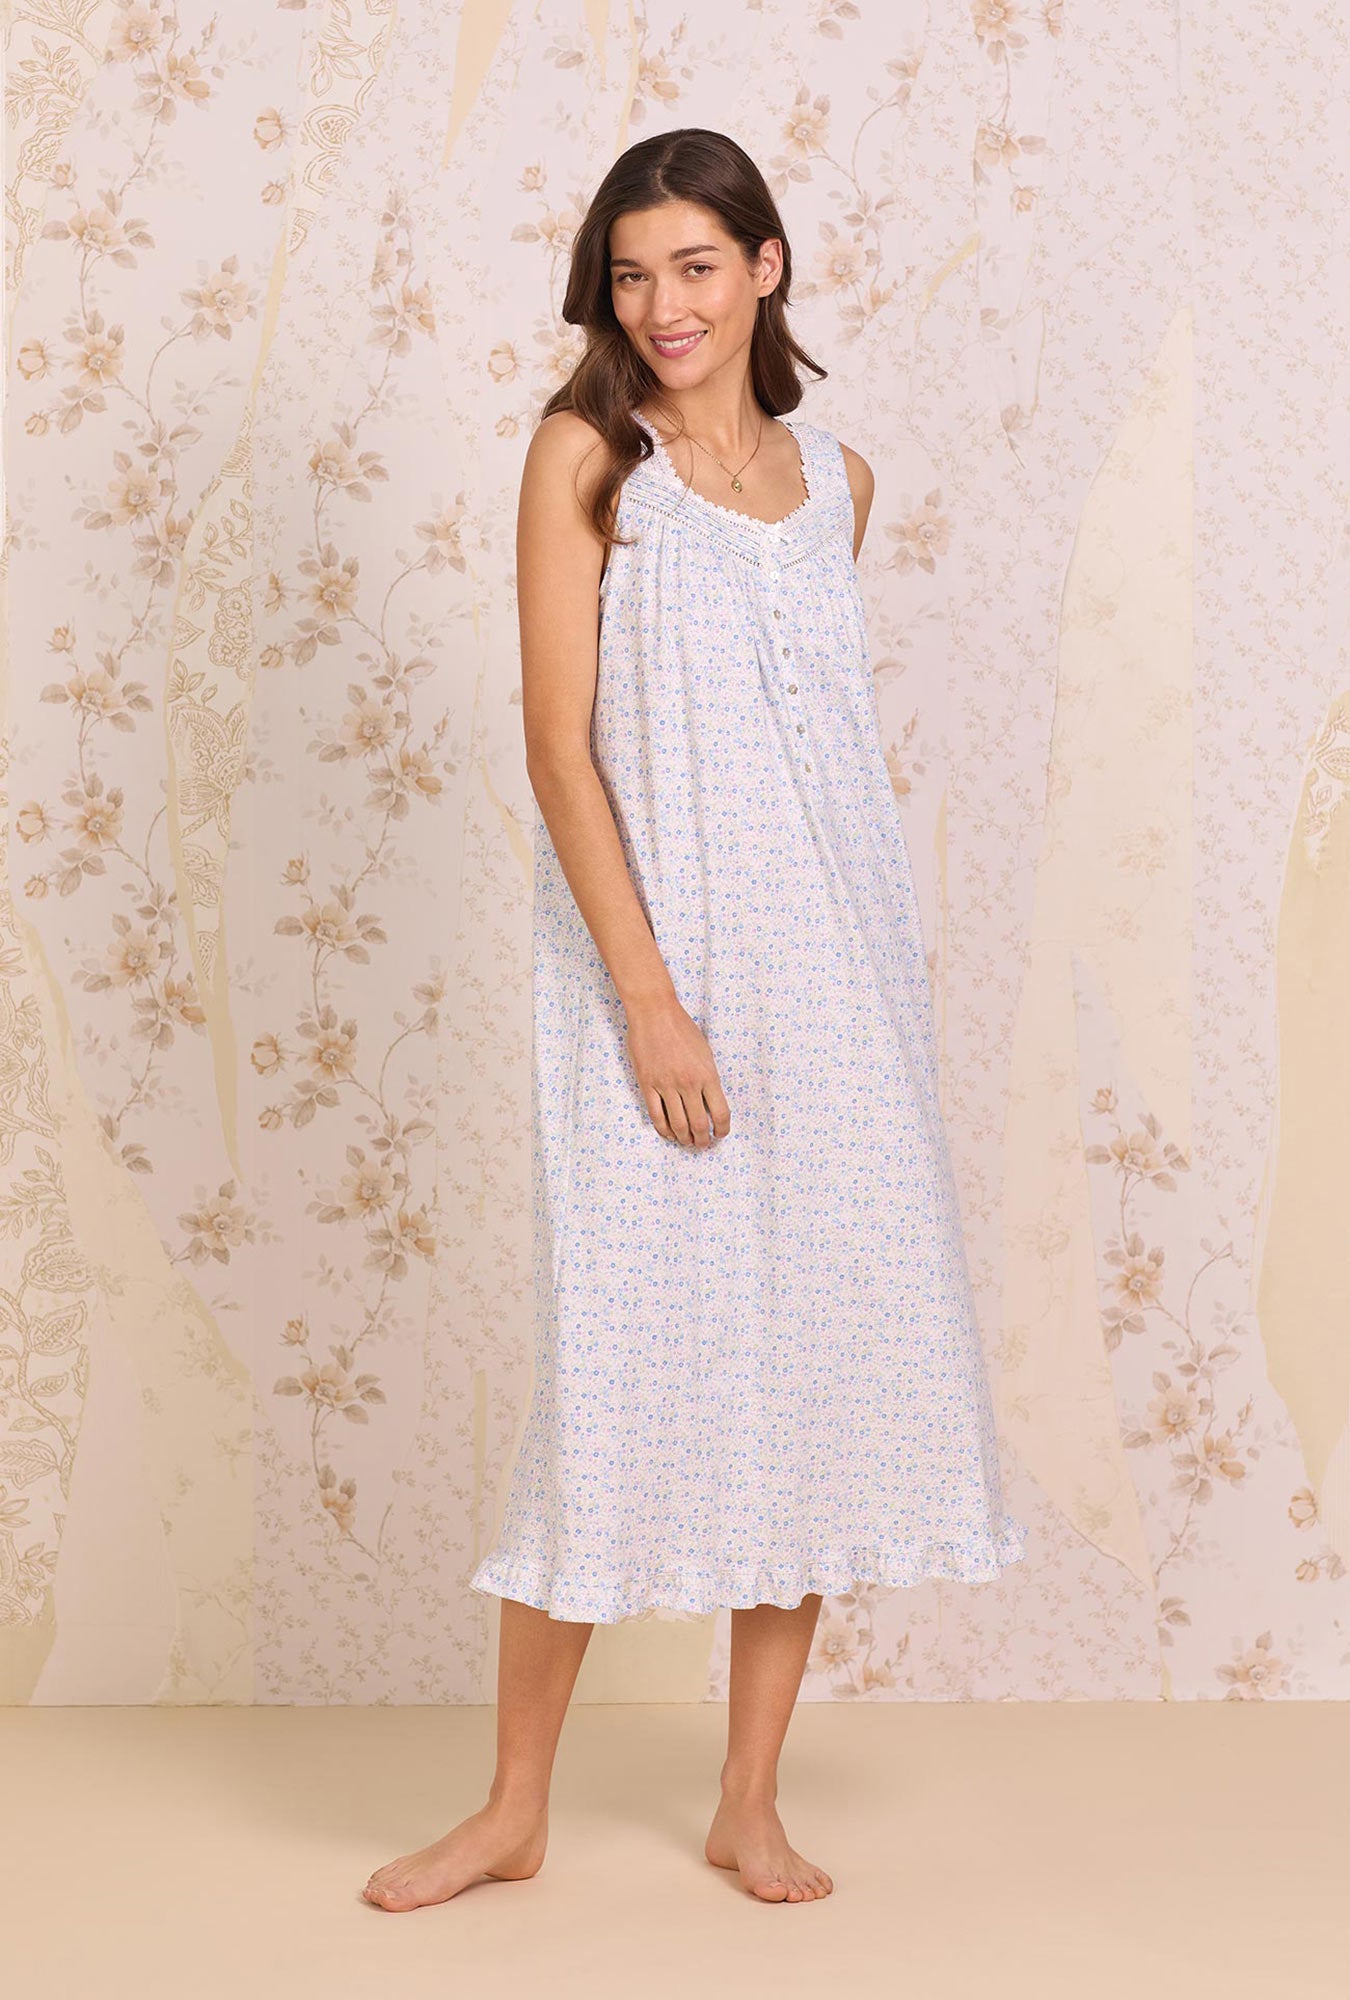 A lady wearing Summer Floral Cotton Knit Long Nightgown